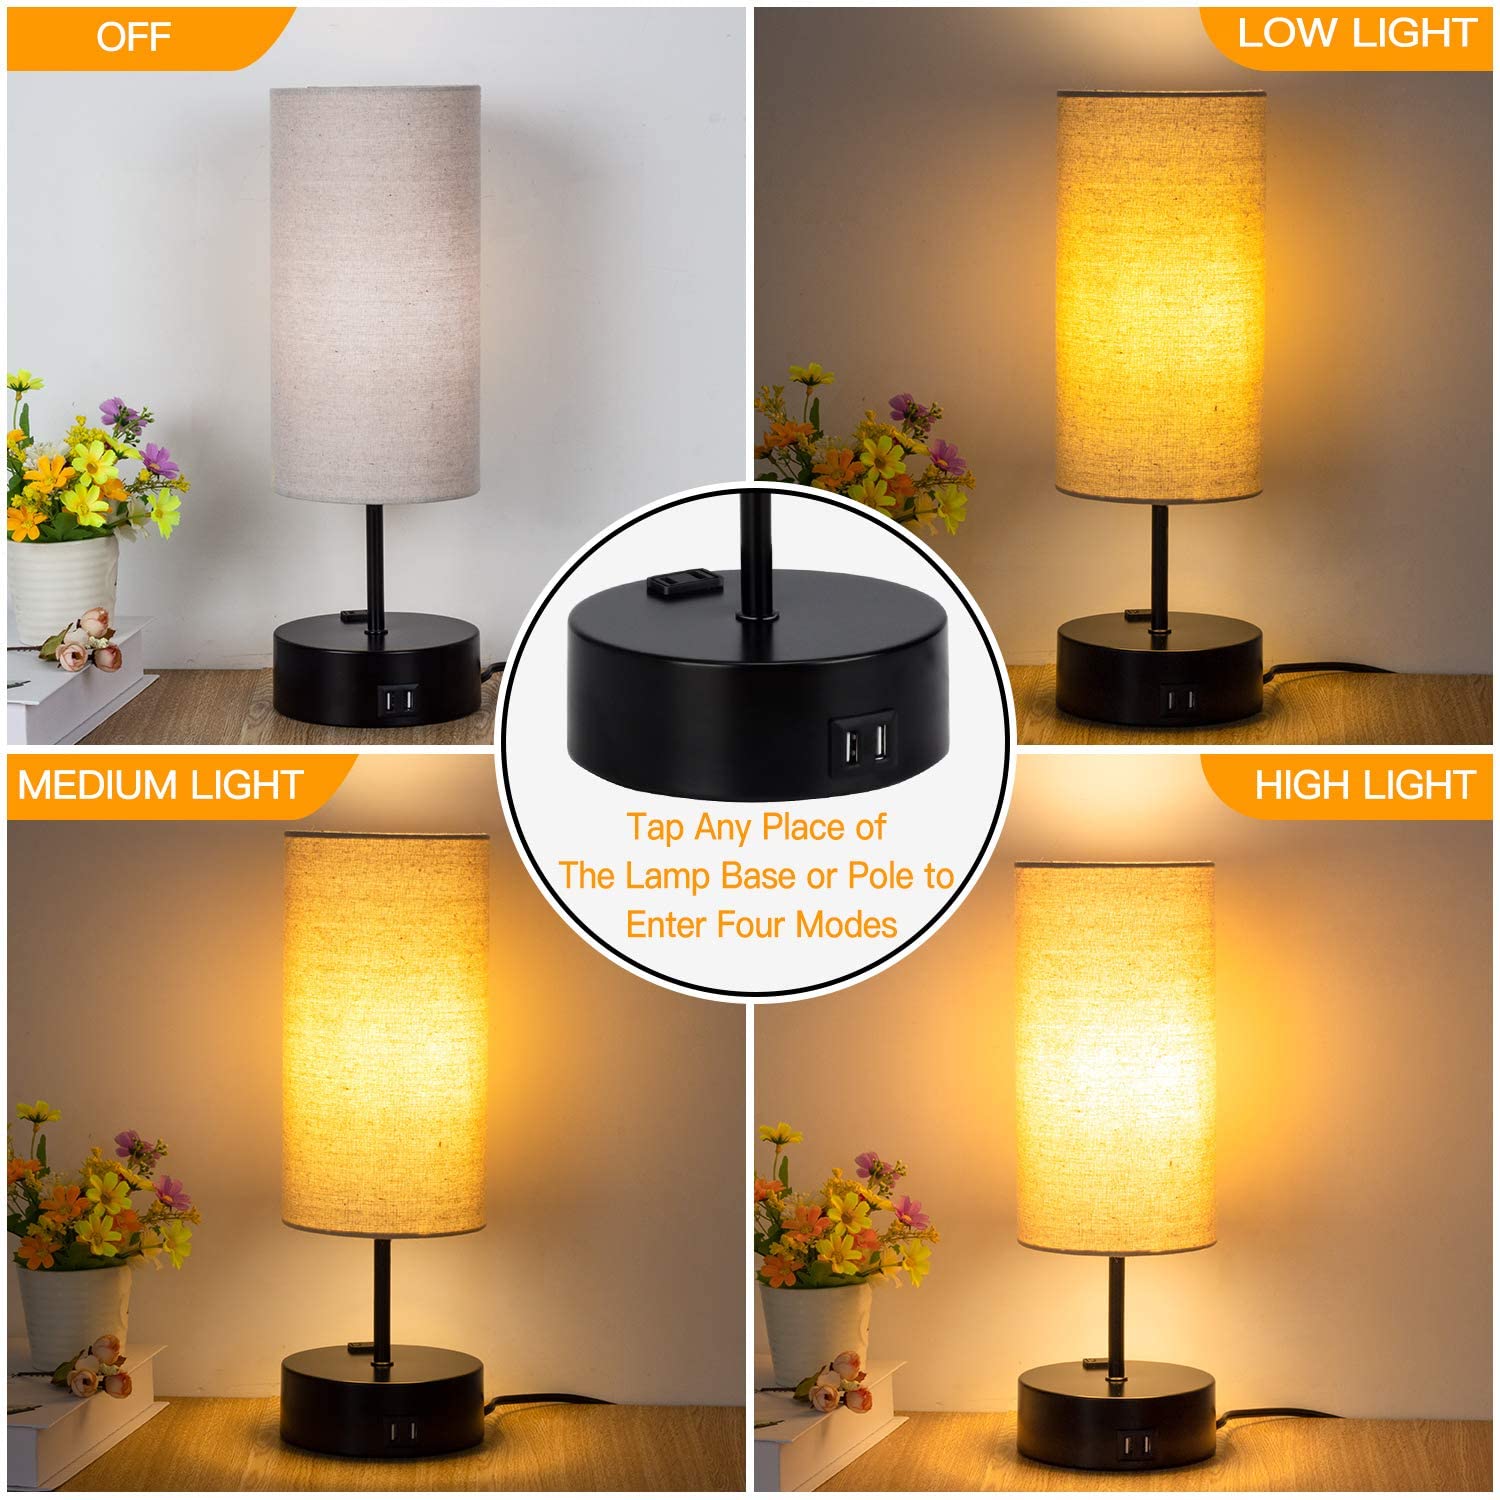 Best Bed Reading Lamp - Brand Review